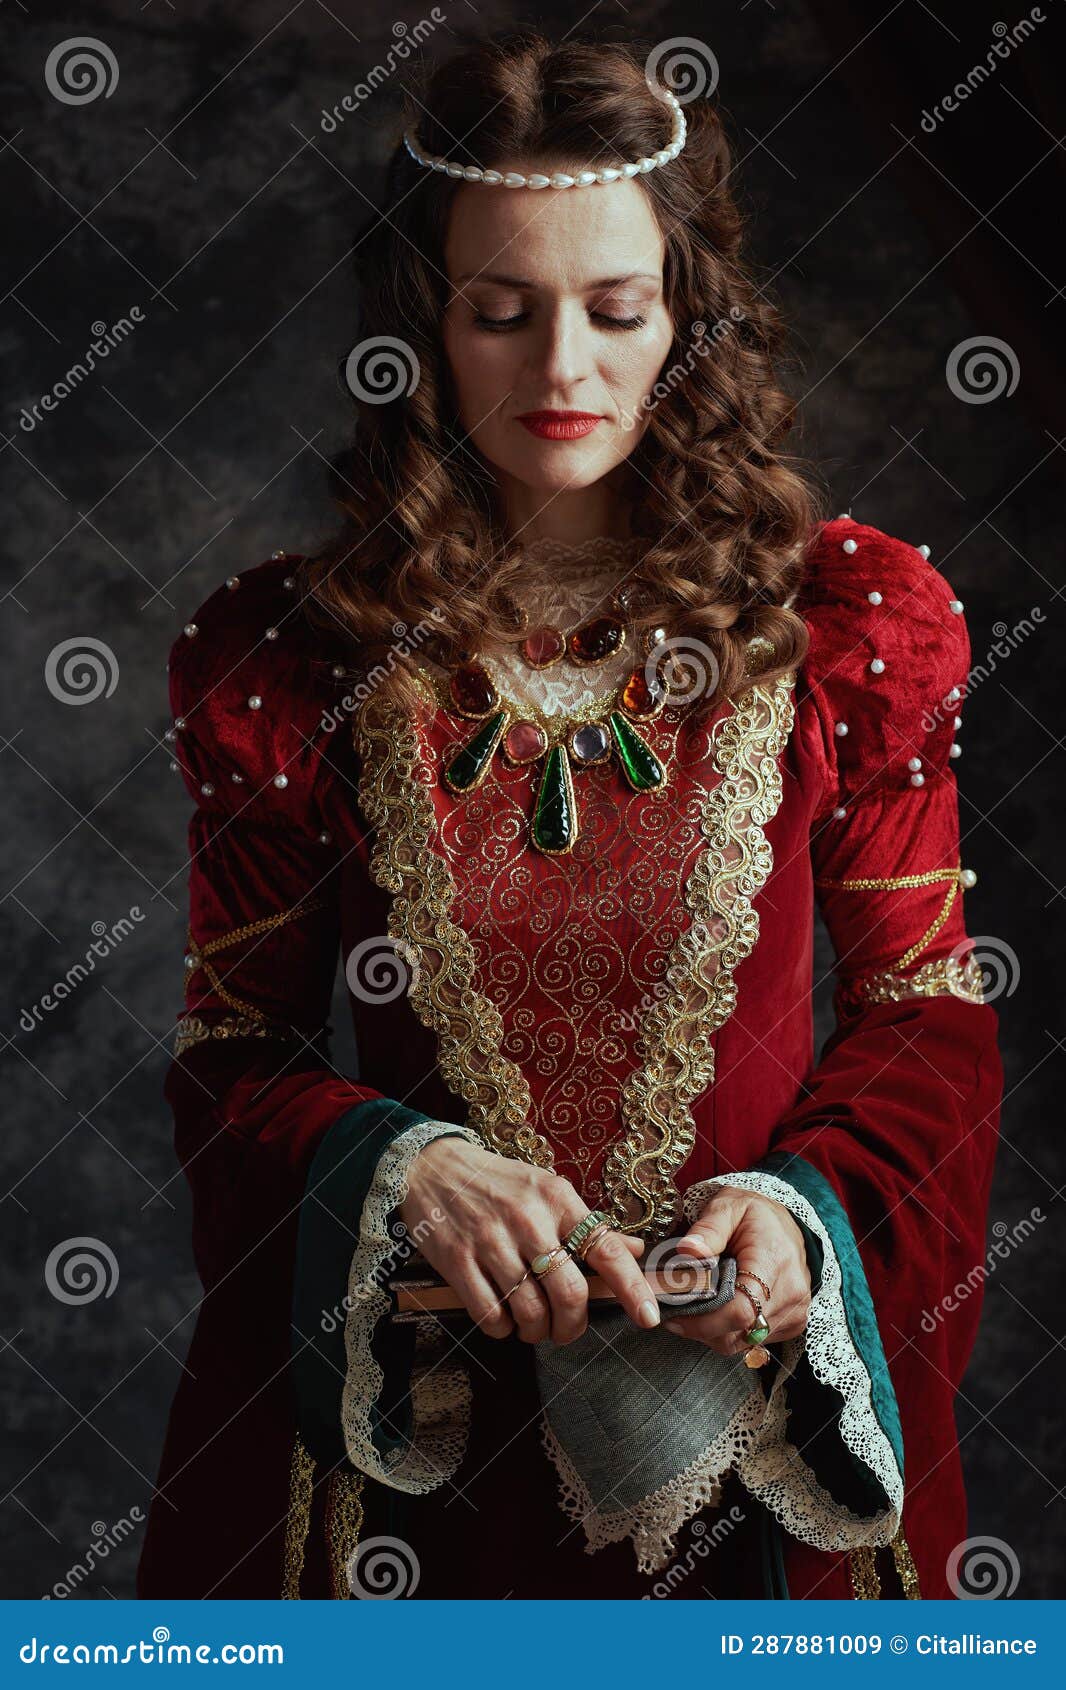 Medieval Queen in Red Dress with Book and Handkerchief Stock Image ...